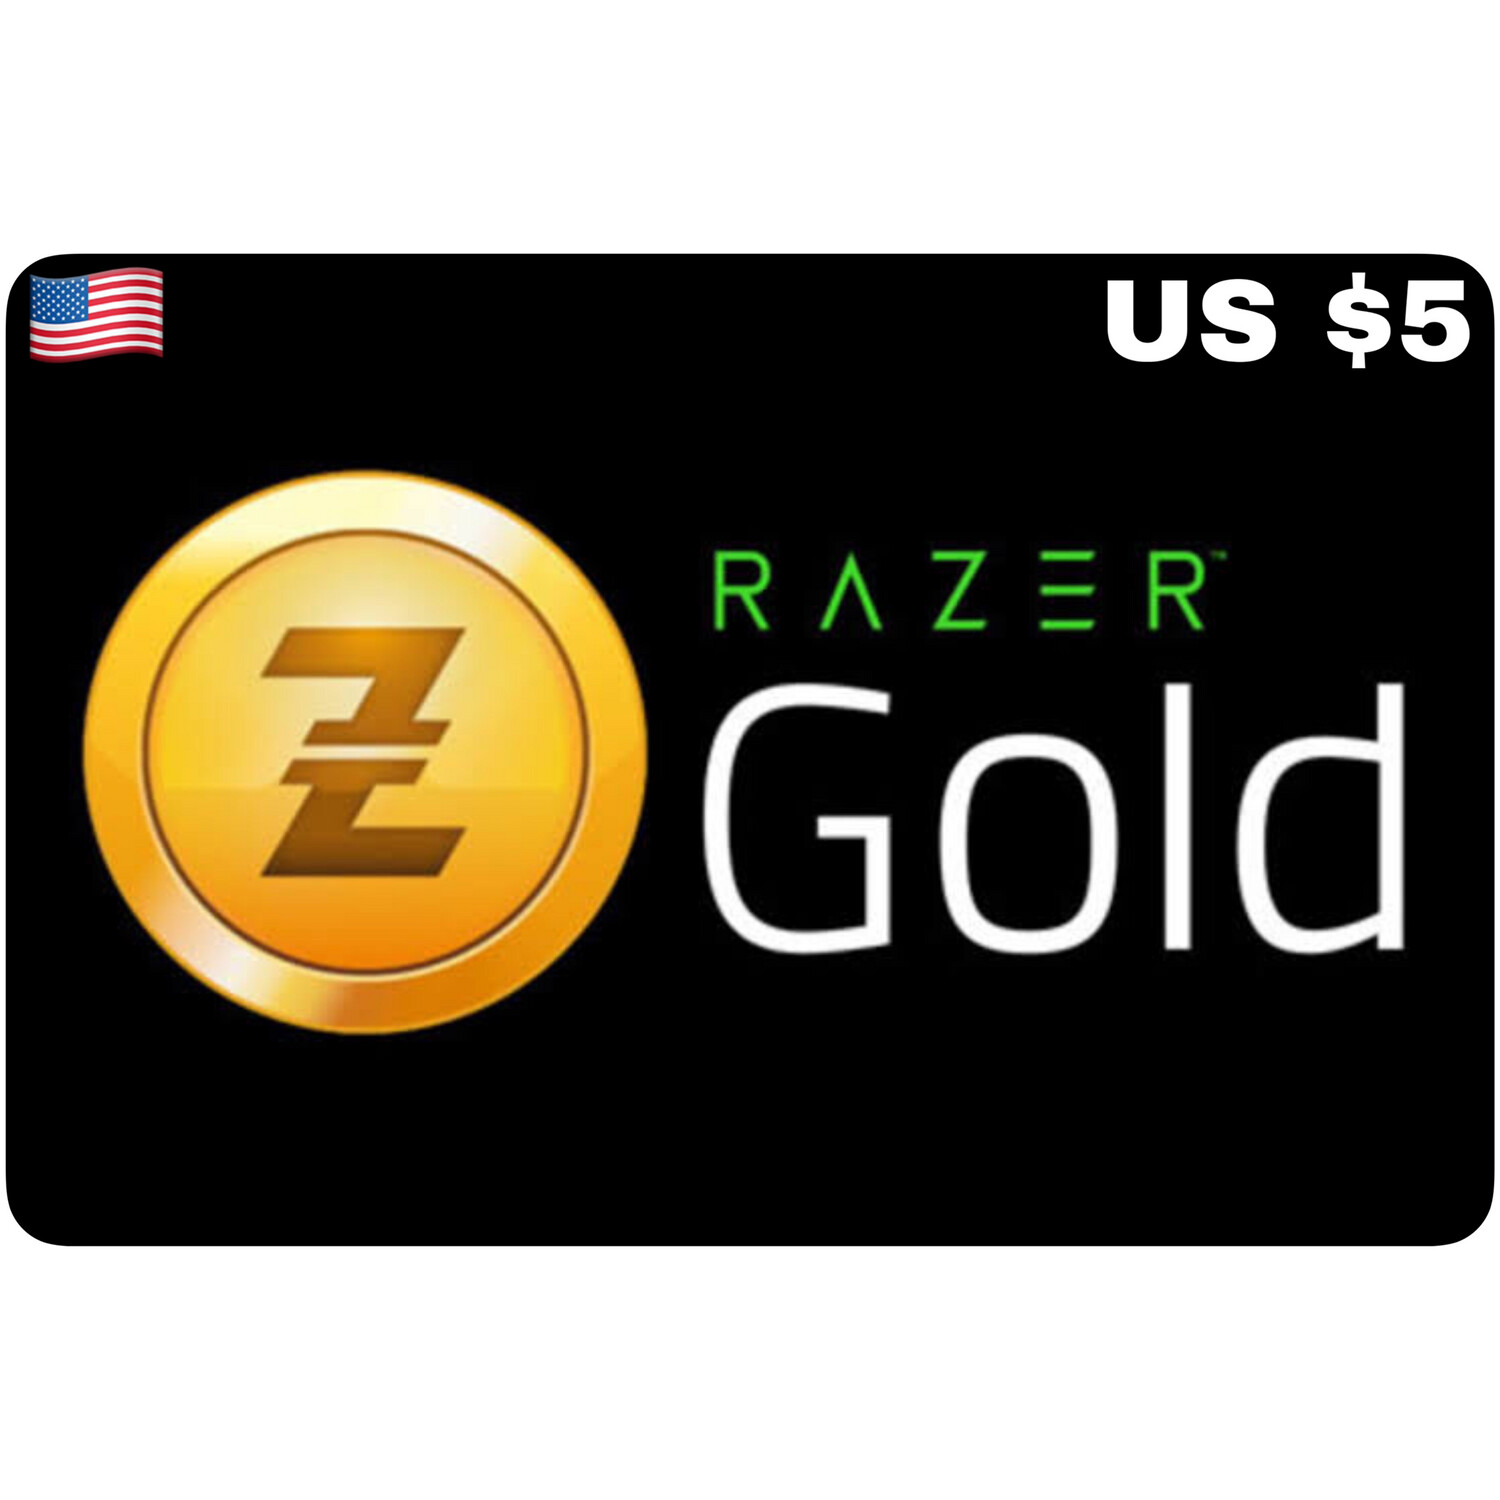 Razer Gold Pin US USD $5 Pin Only